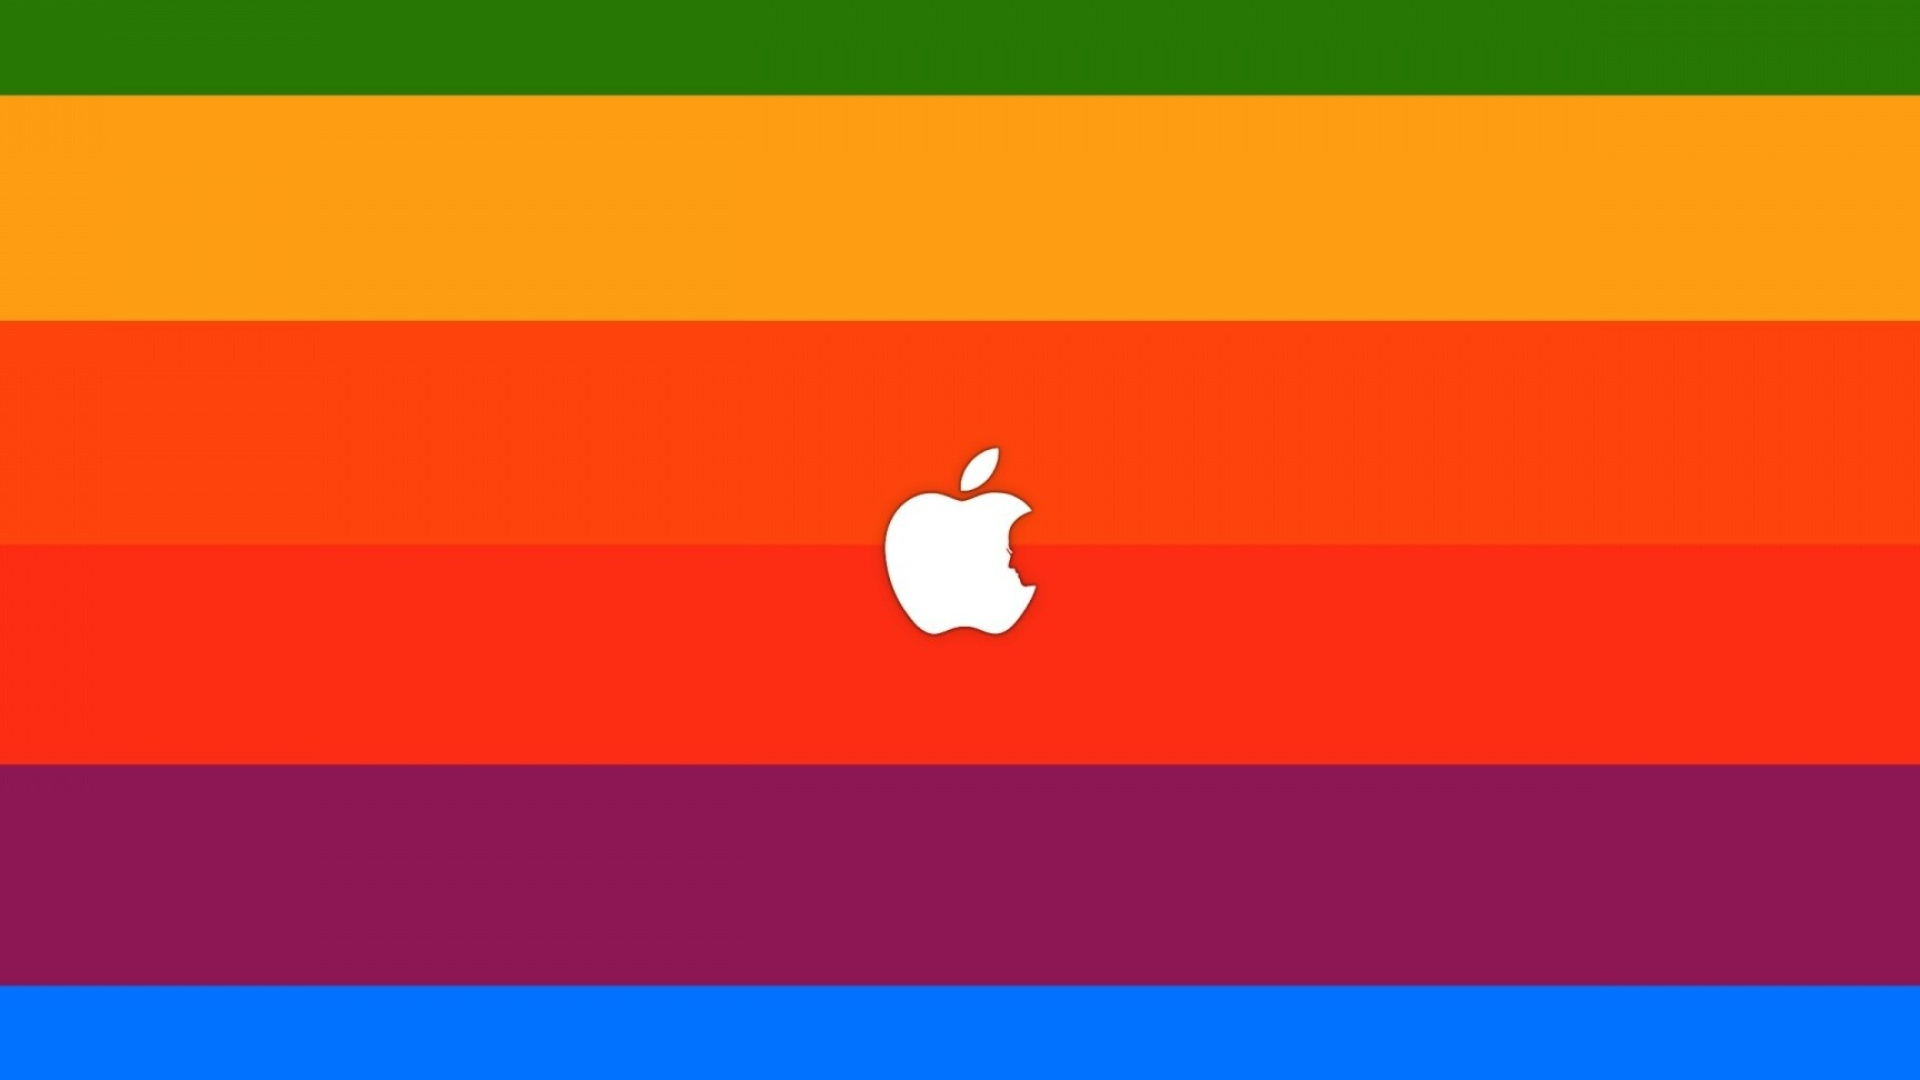 Apple Logo: The Rainbow Strip Apple, Designed in 1977 by Rob Janoff. 1920x1080 Full HD Background.